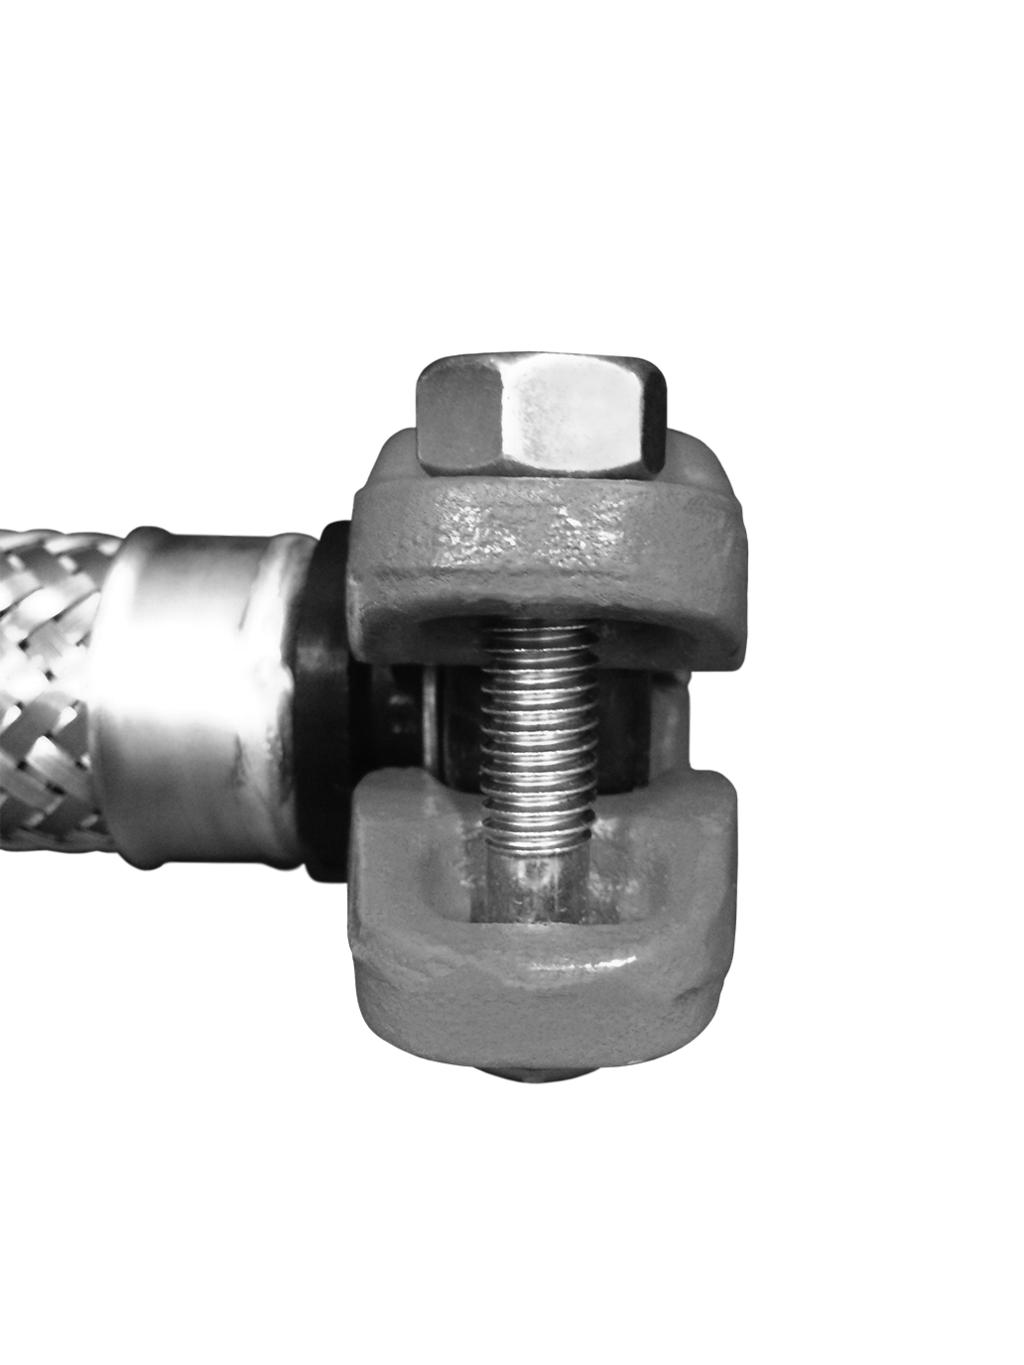 1-INCH/DN5 IGS CONNECTION TO THE SPRINKLER PIPING USING A SERIES AH1-CC-LP OR AH-CC-LP FLEXIBLE HOSE CORRECT - IGS Groove Profile INCORRECT - Orignal Groove System (OGS) Groove Profile The Style 108